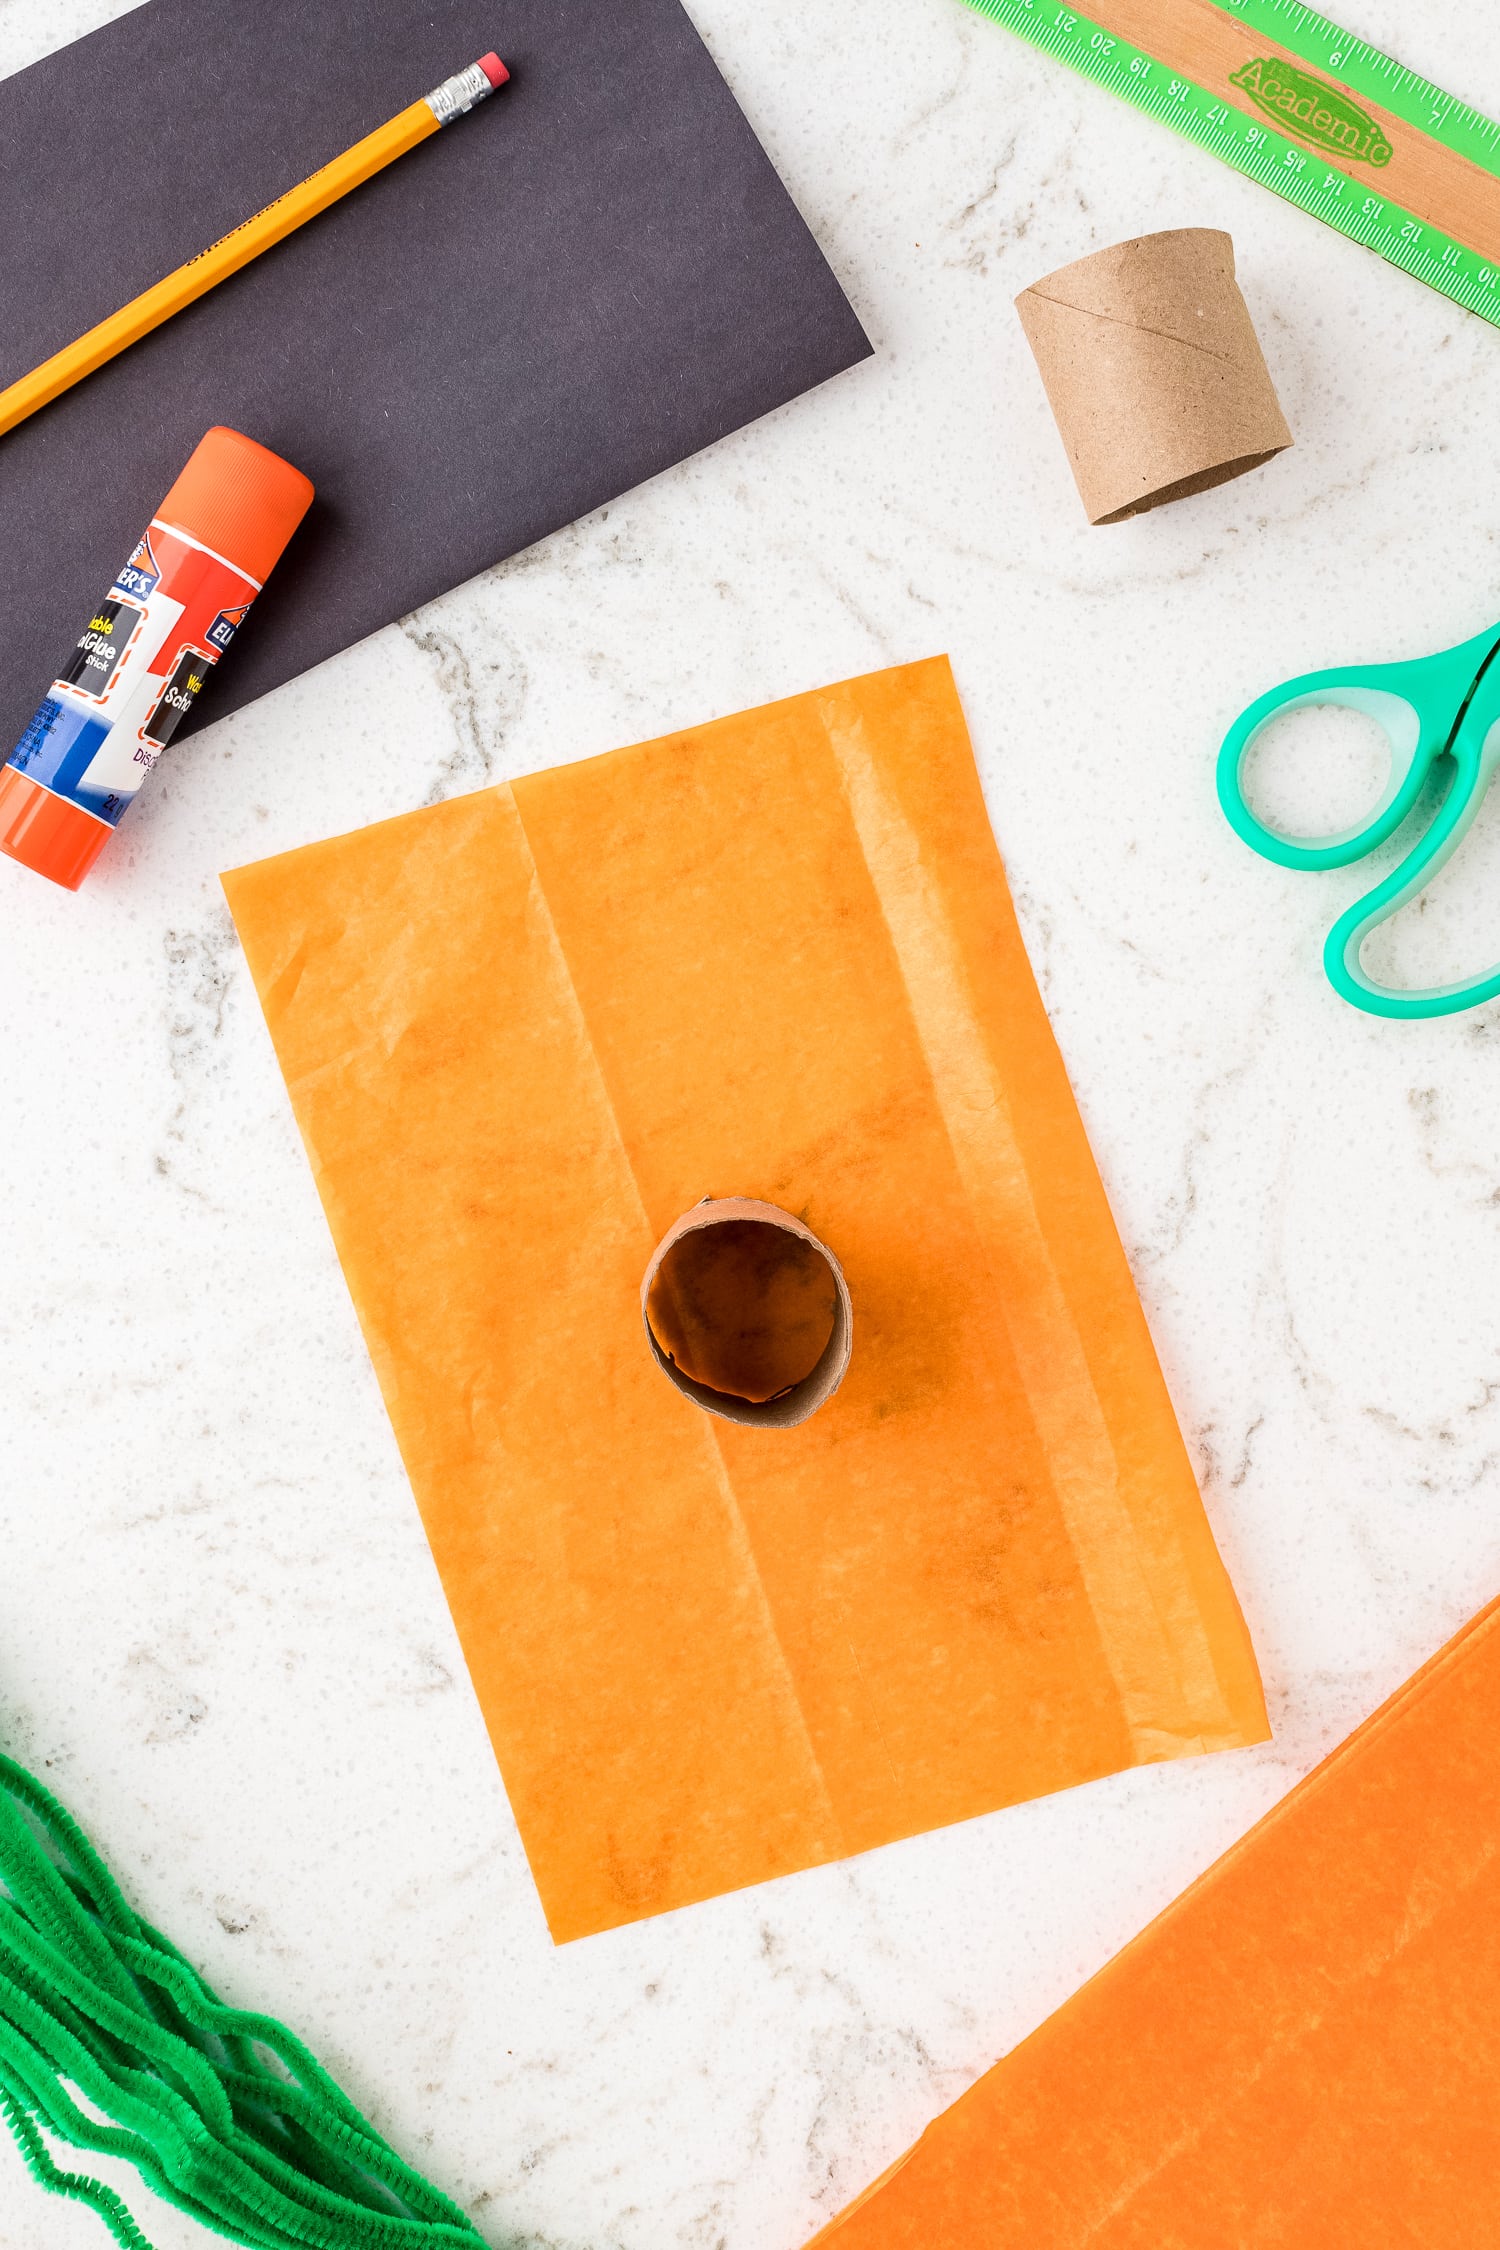 Toilet Pap Roll on top of orange tissue paper